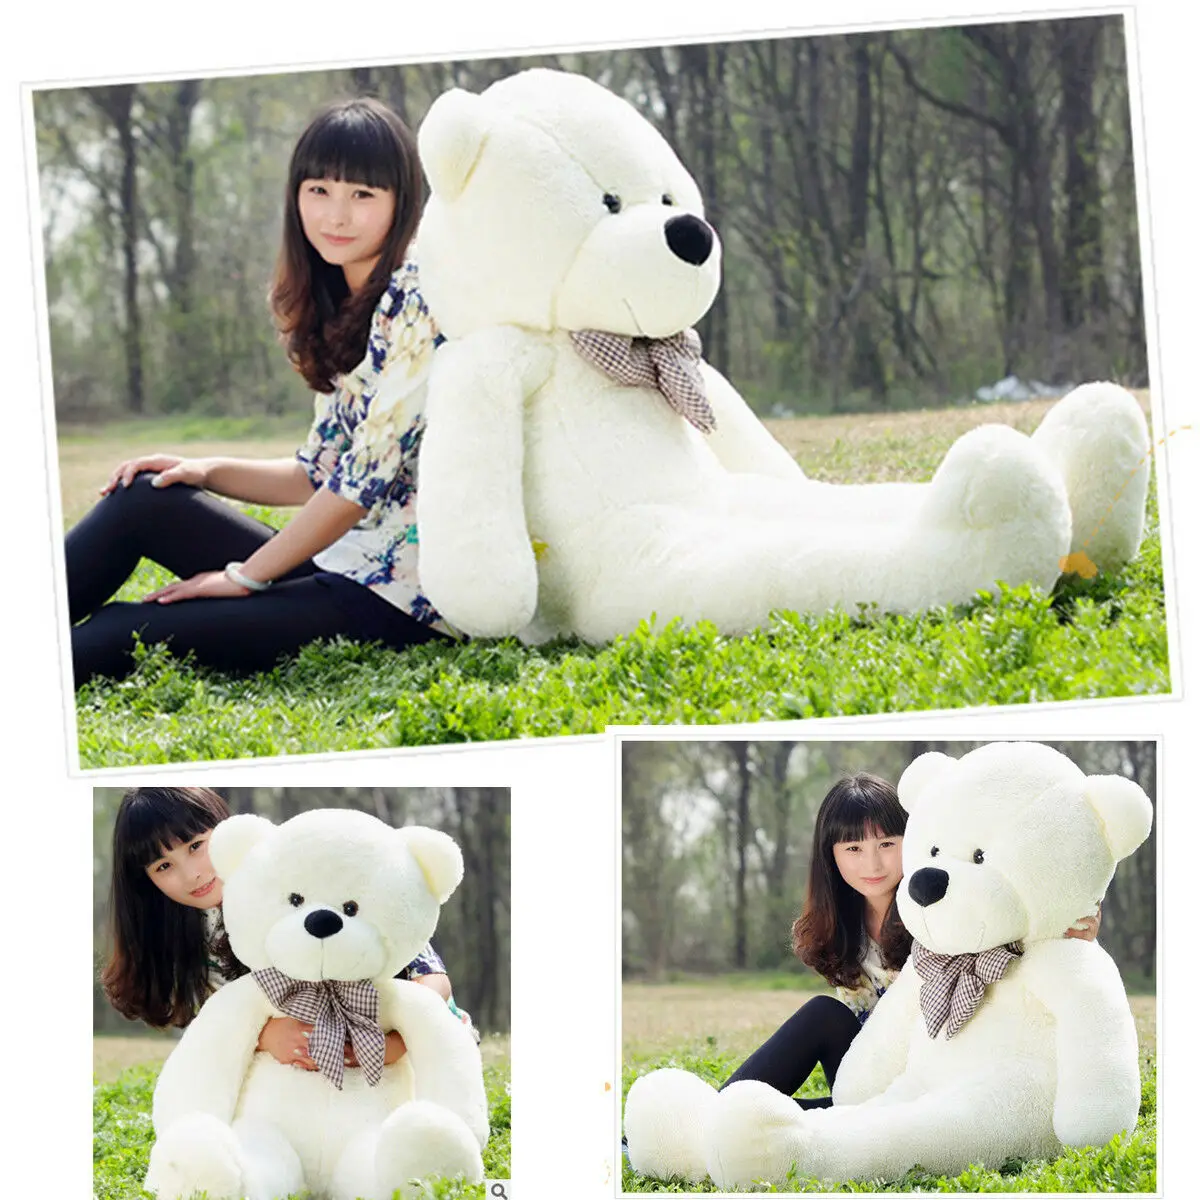 55‘’ Big Teddy Bear White Plush Soft Toys Doll Only Cover Case No Filled Gift US 